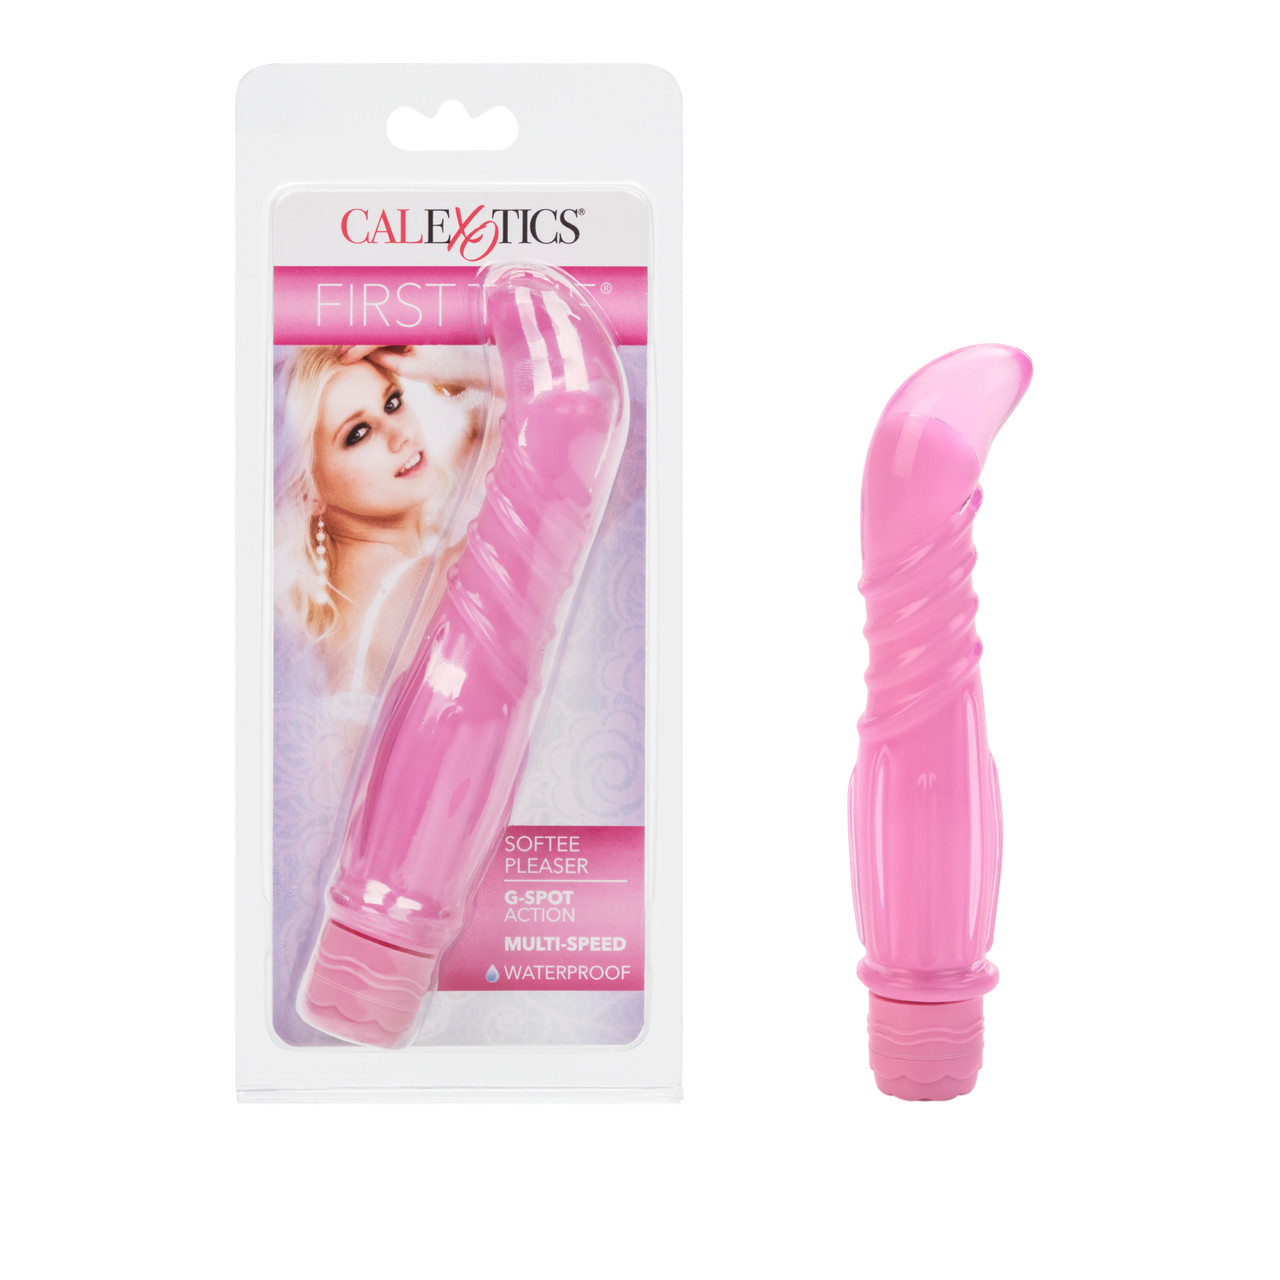 FIRST TIME SOFTEE PLEASER PINK